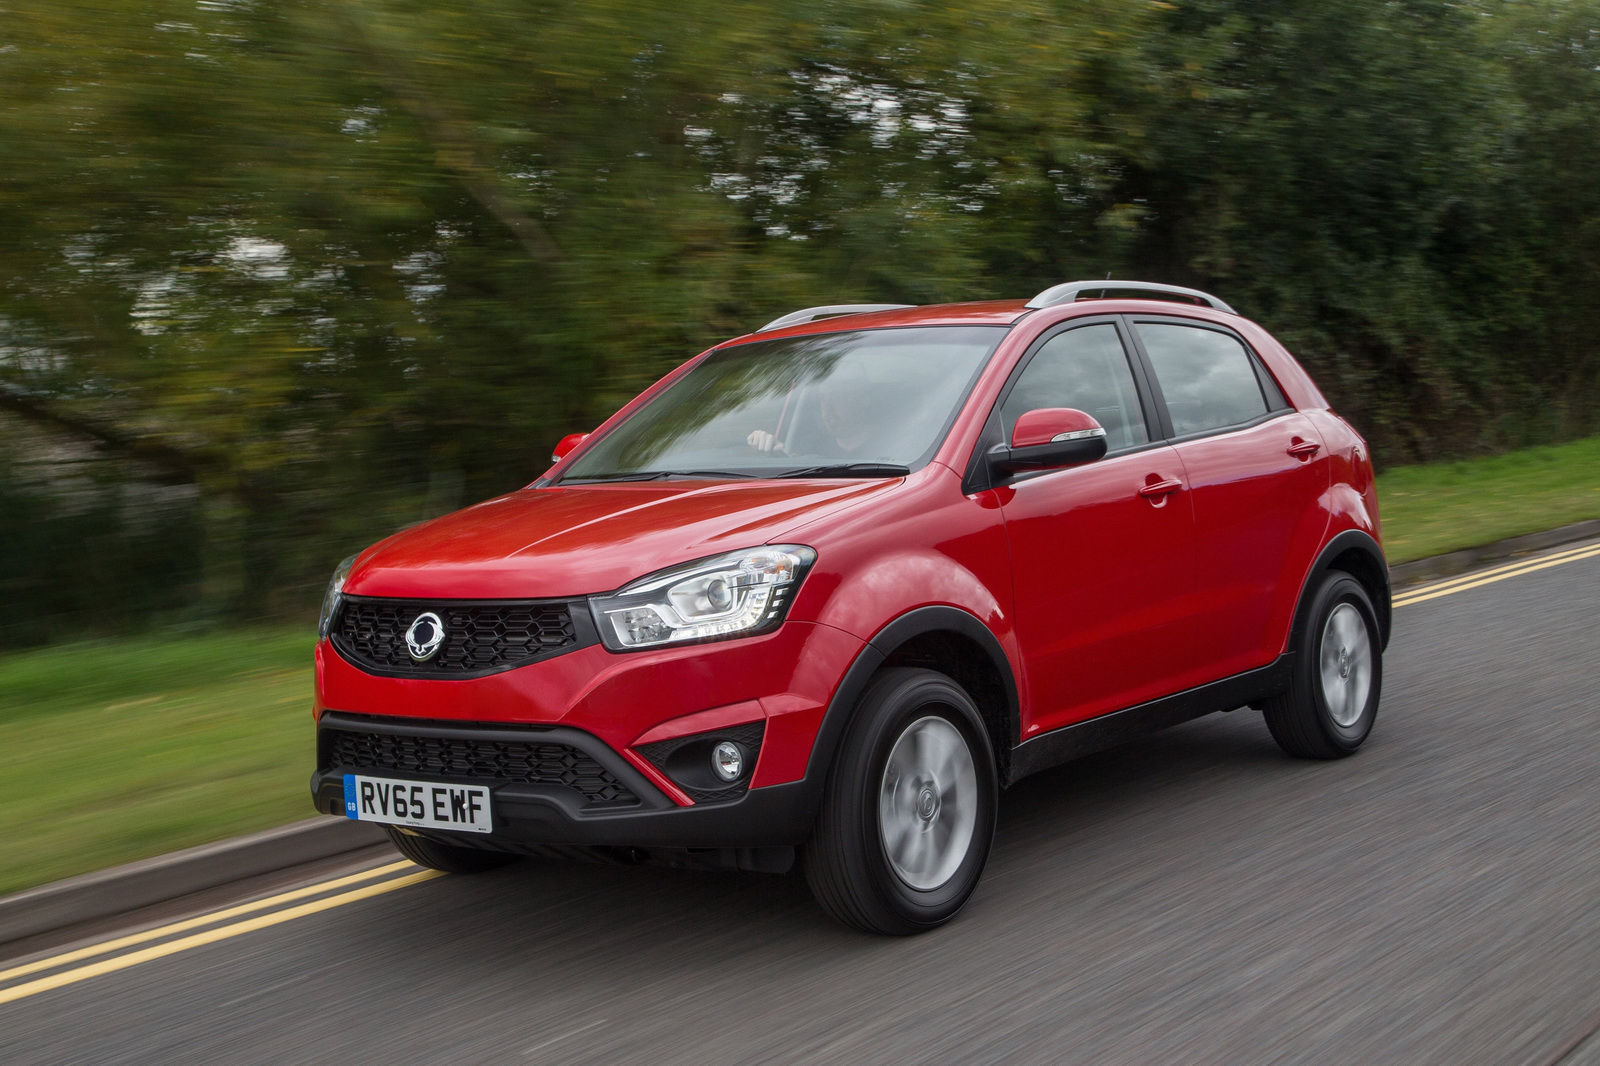 SsangYong Korando To Get Electric Variant With 300 Km Range